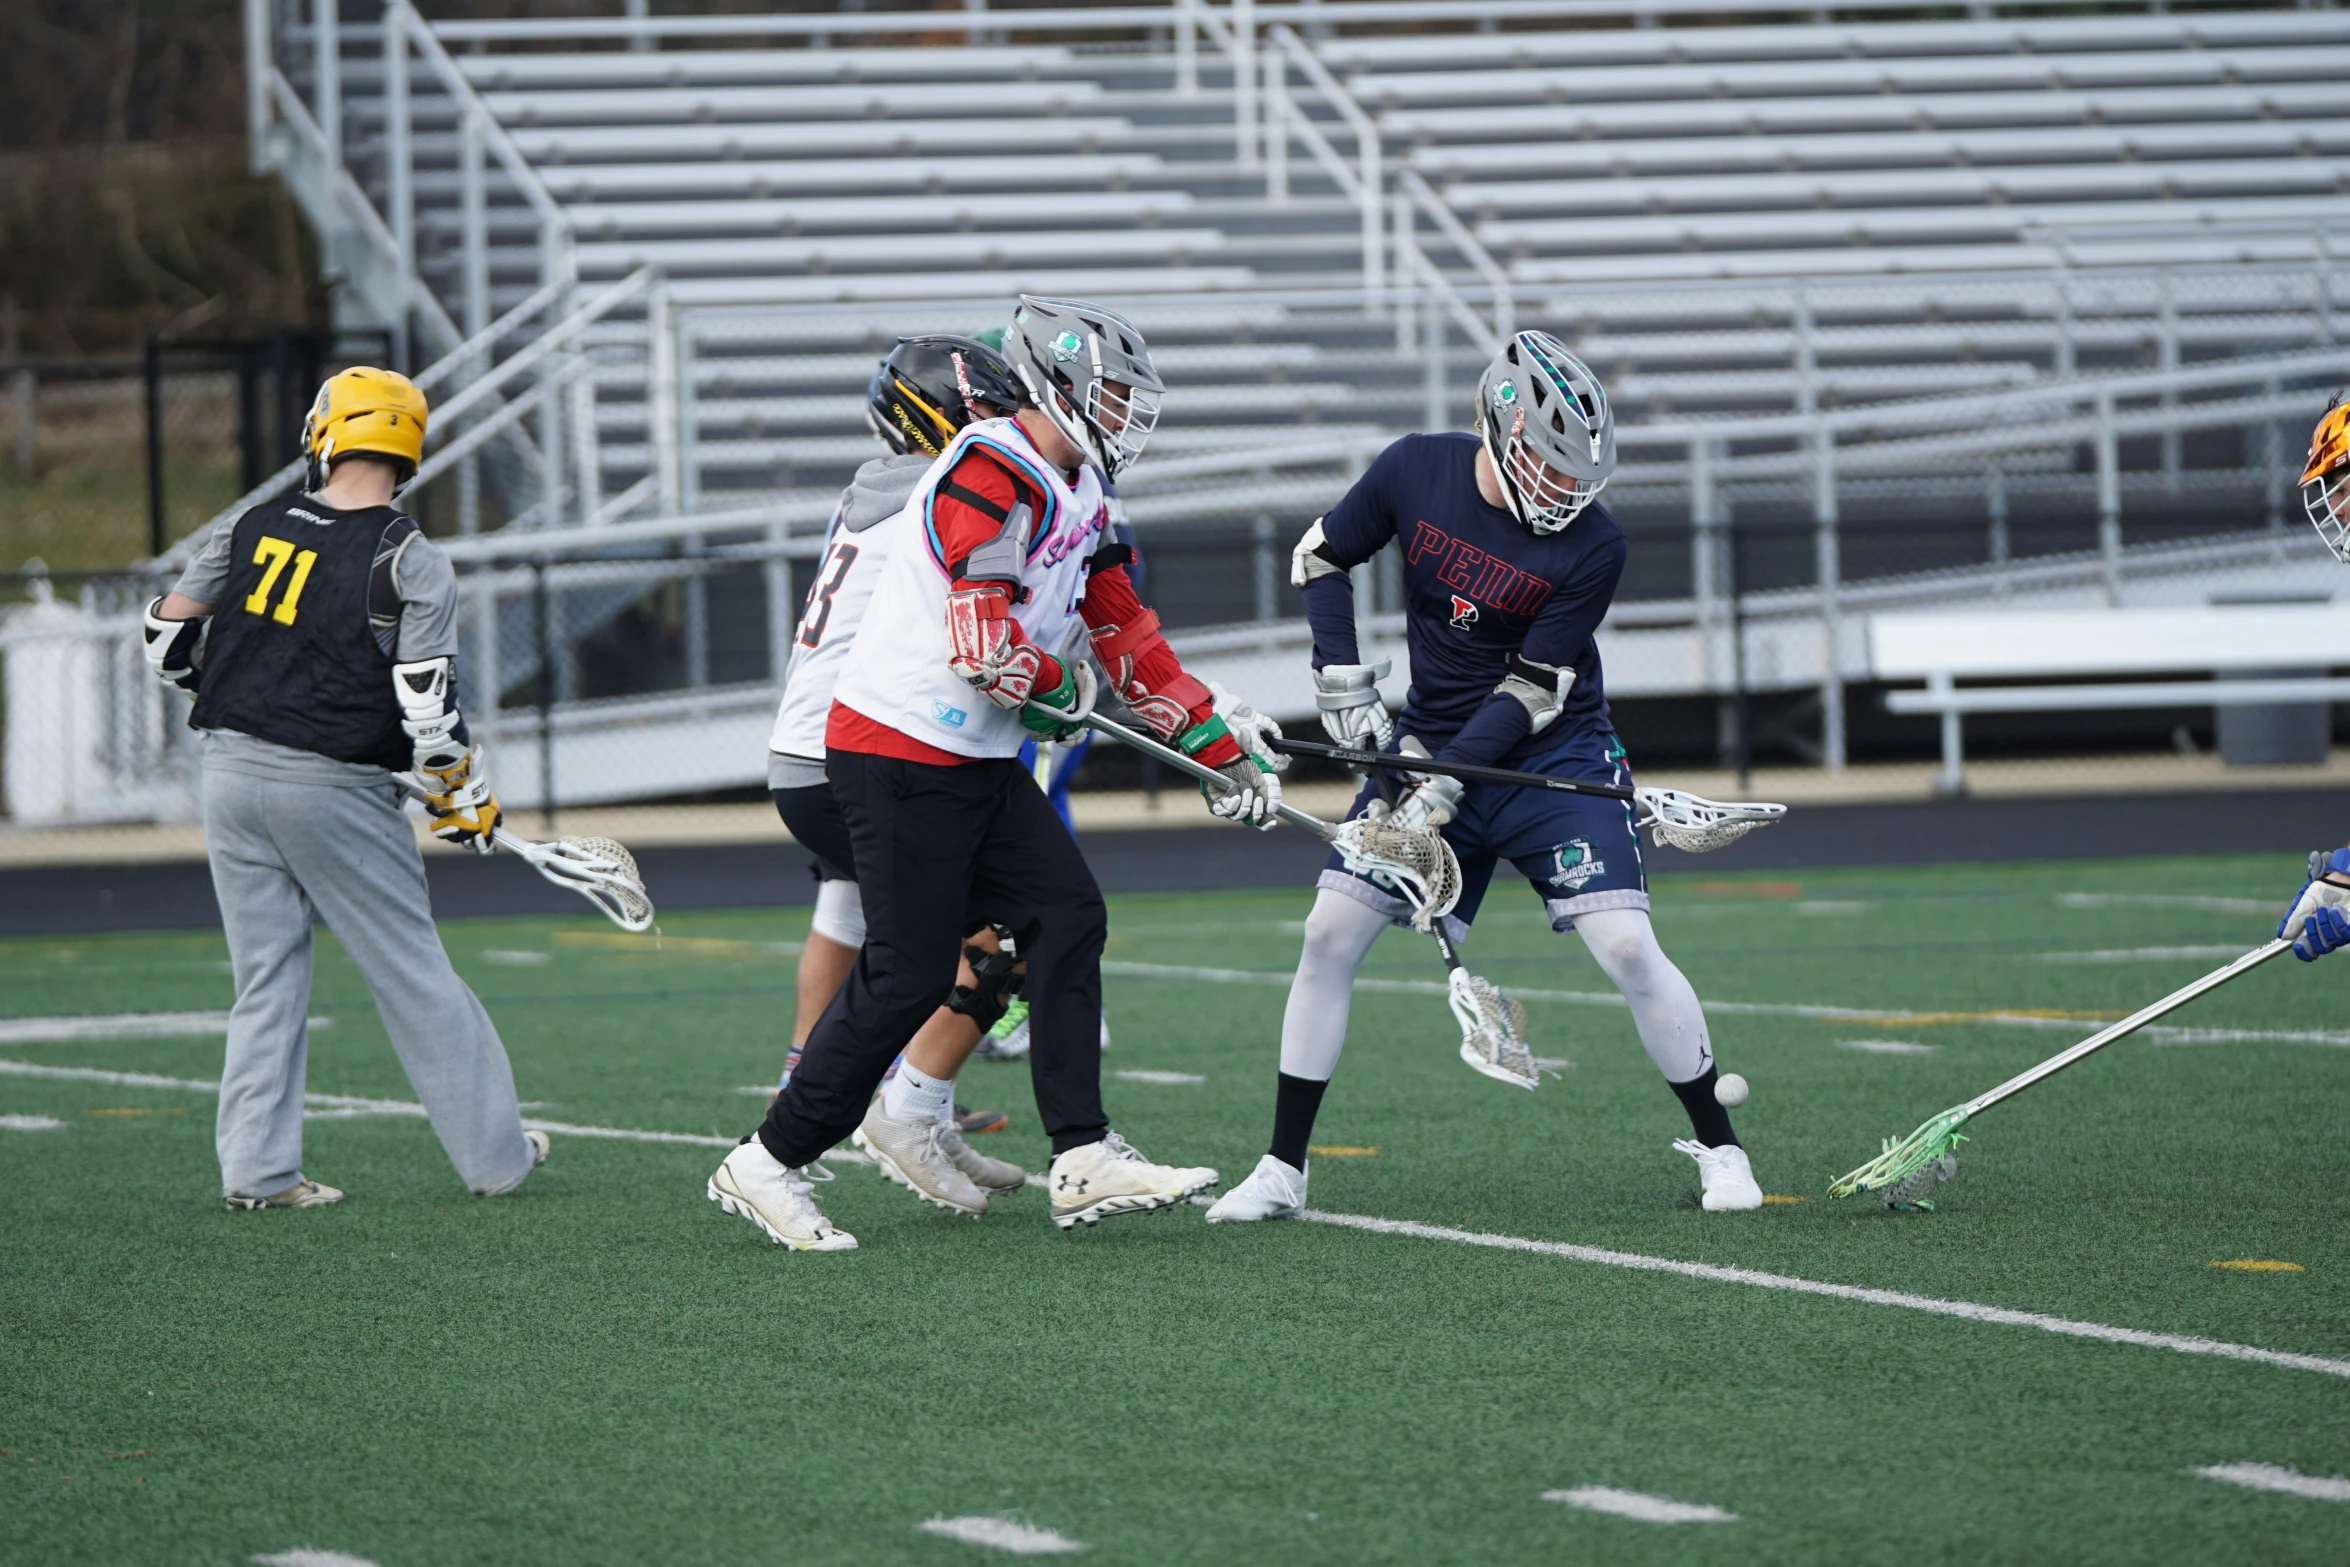 three boys in uniforms play lacrosse on the field